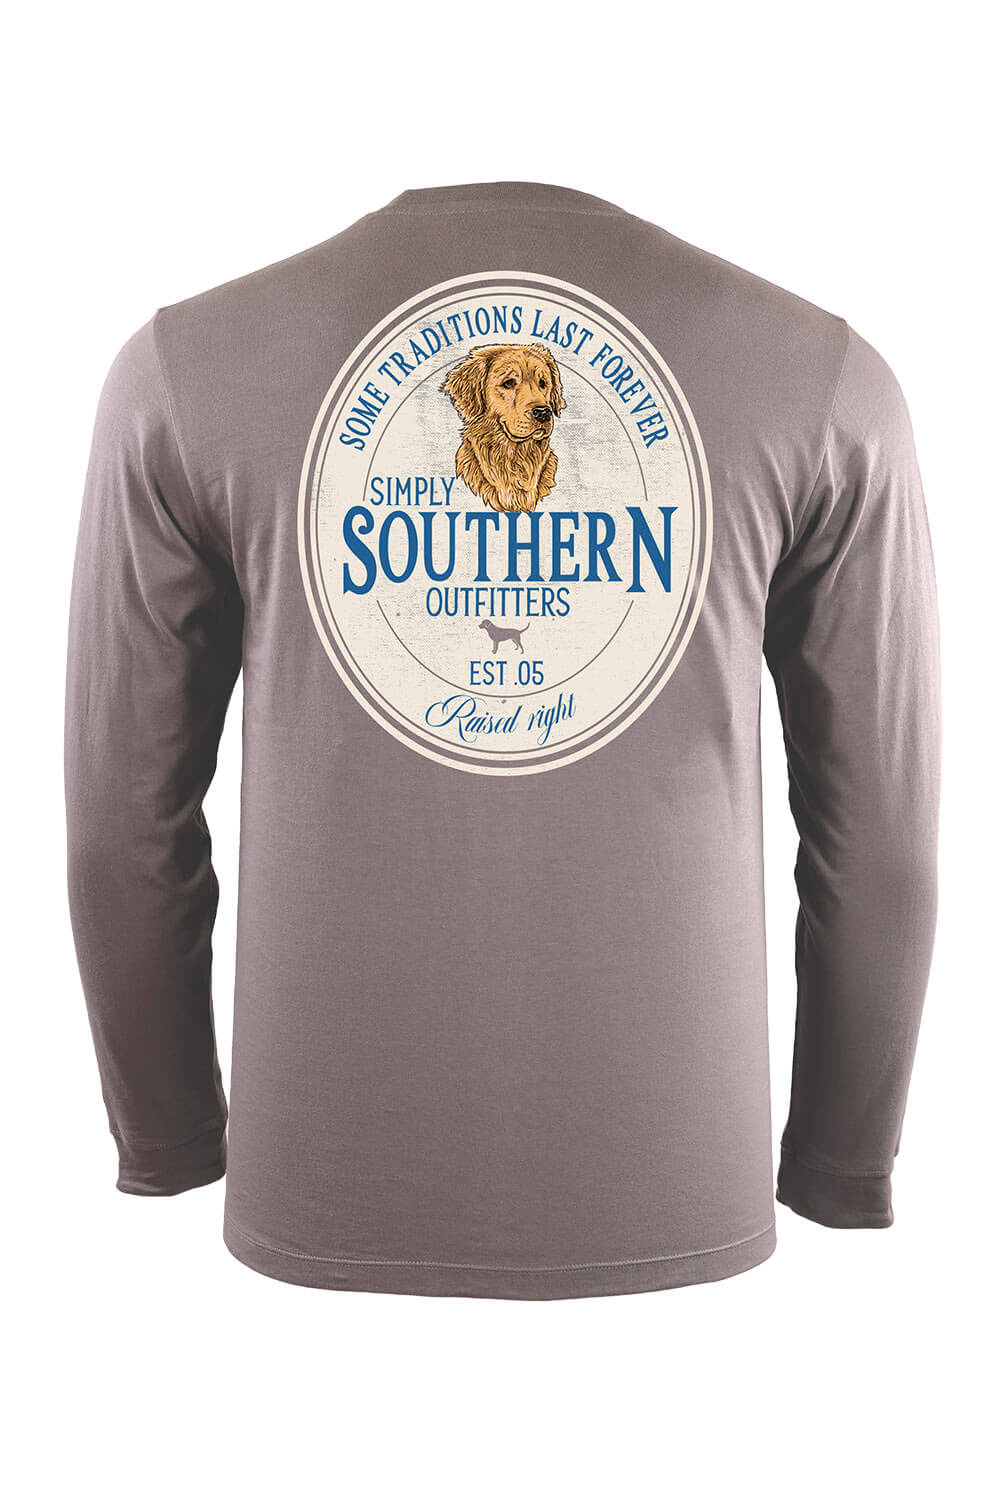 Simply Southern Long Sleeve Golden Retriever T-Shirt for Men in Grey